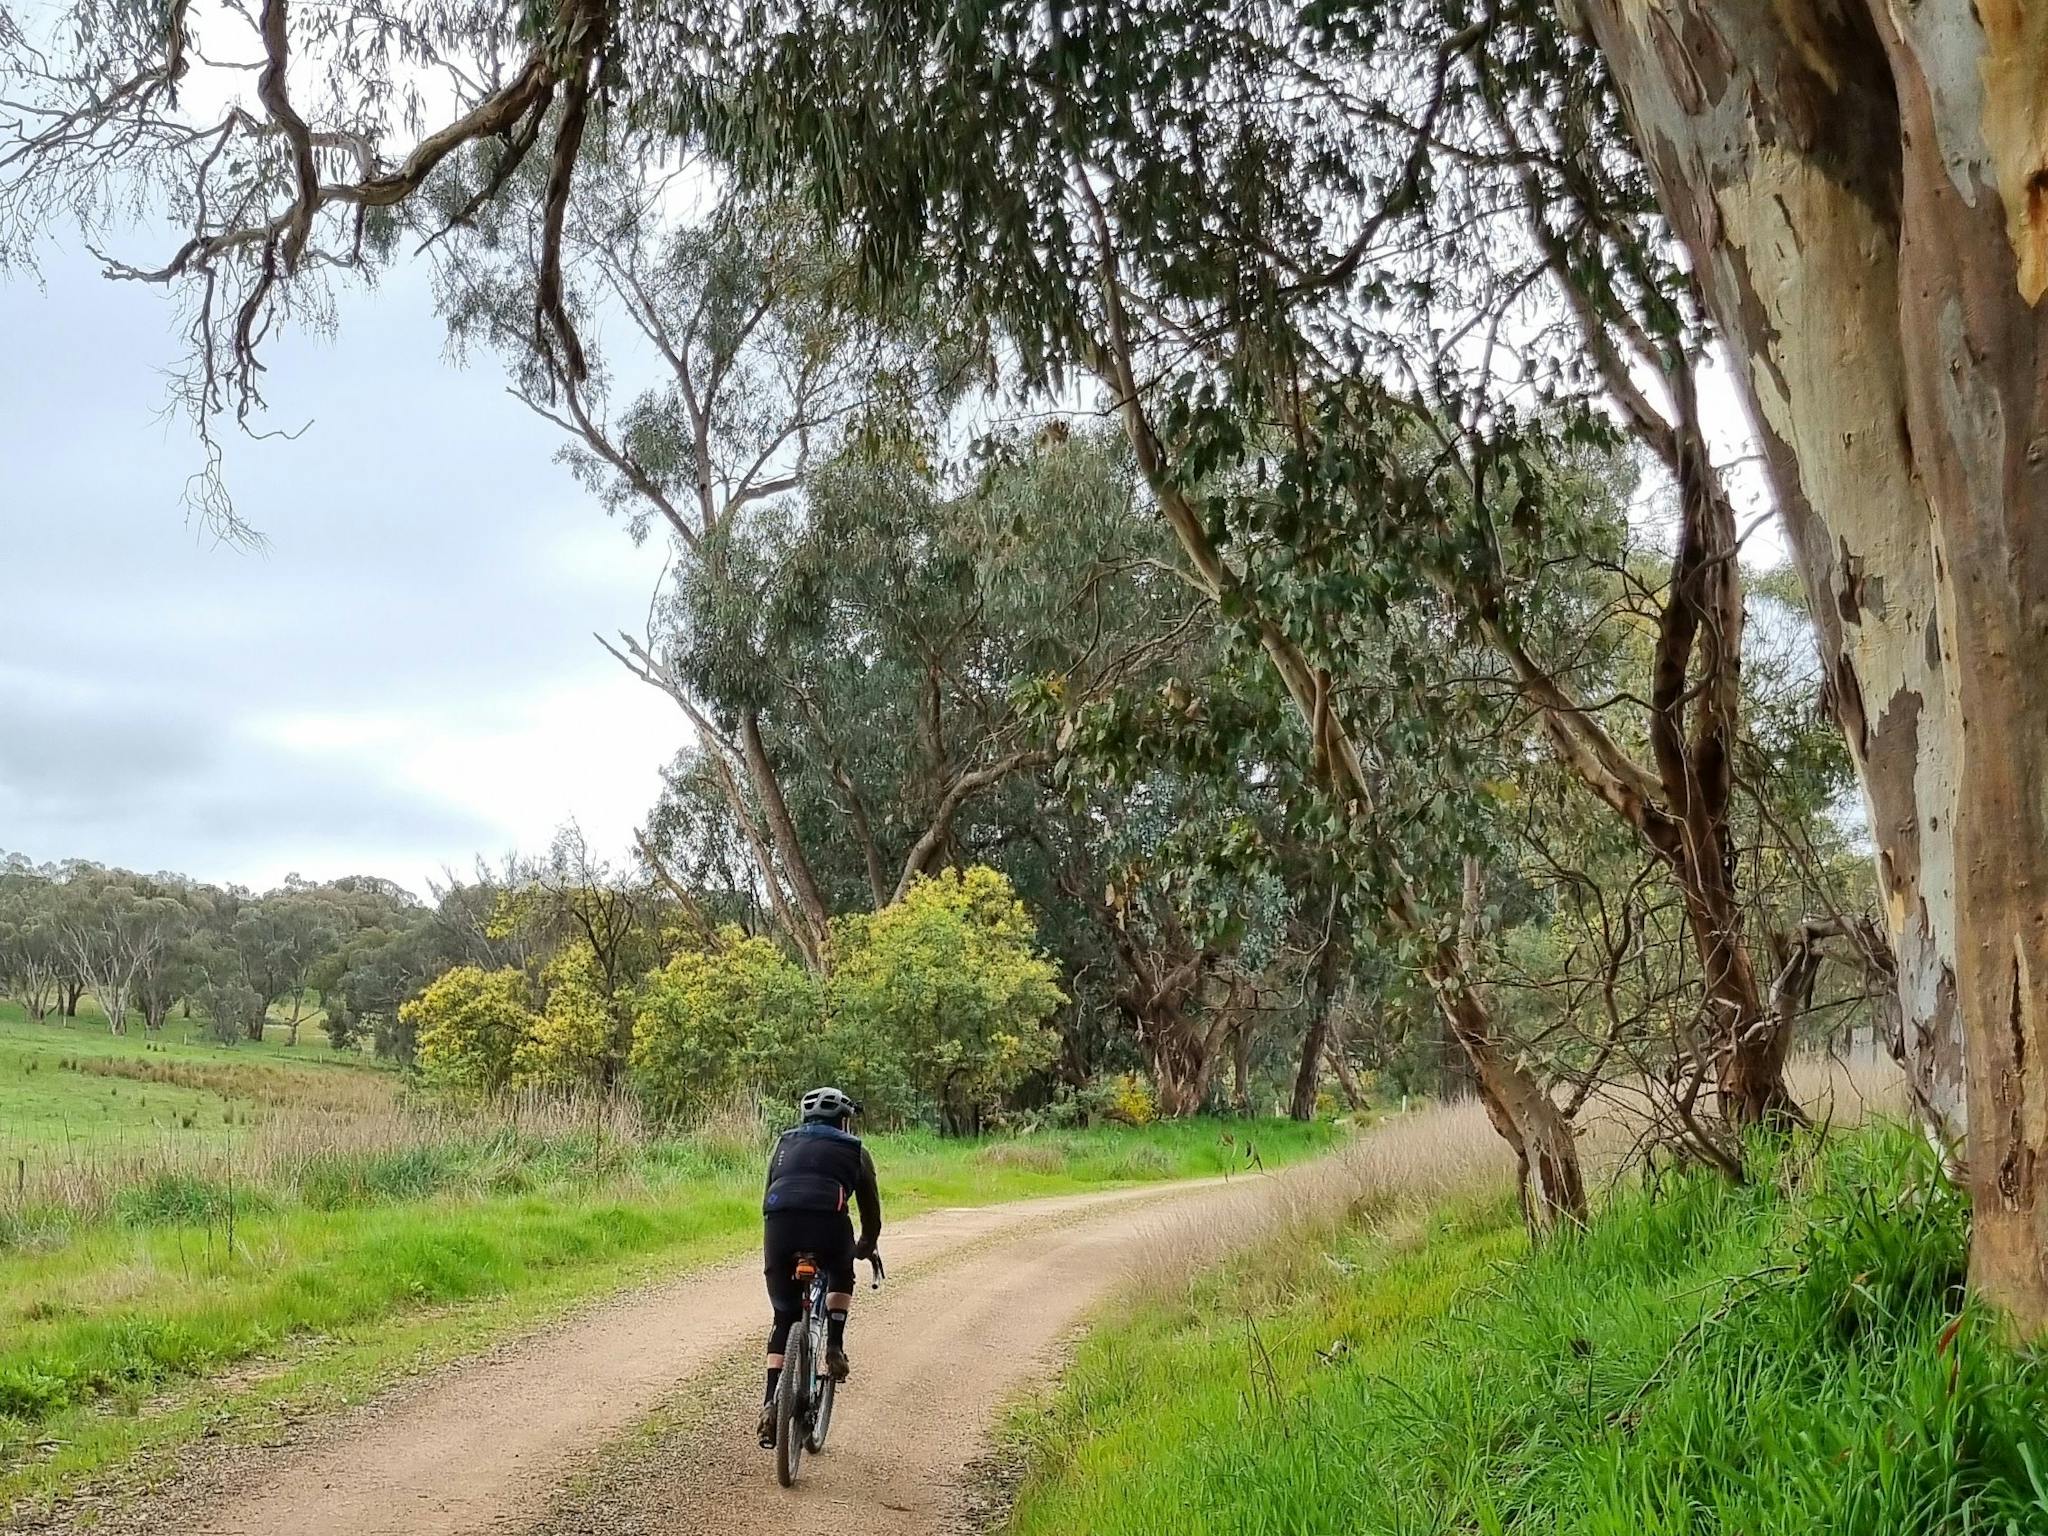 Cyclist on Gravel Road, puddles, green grass & trees on right, farmland, light green bushes on left